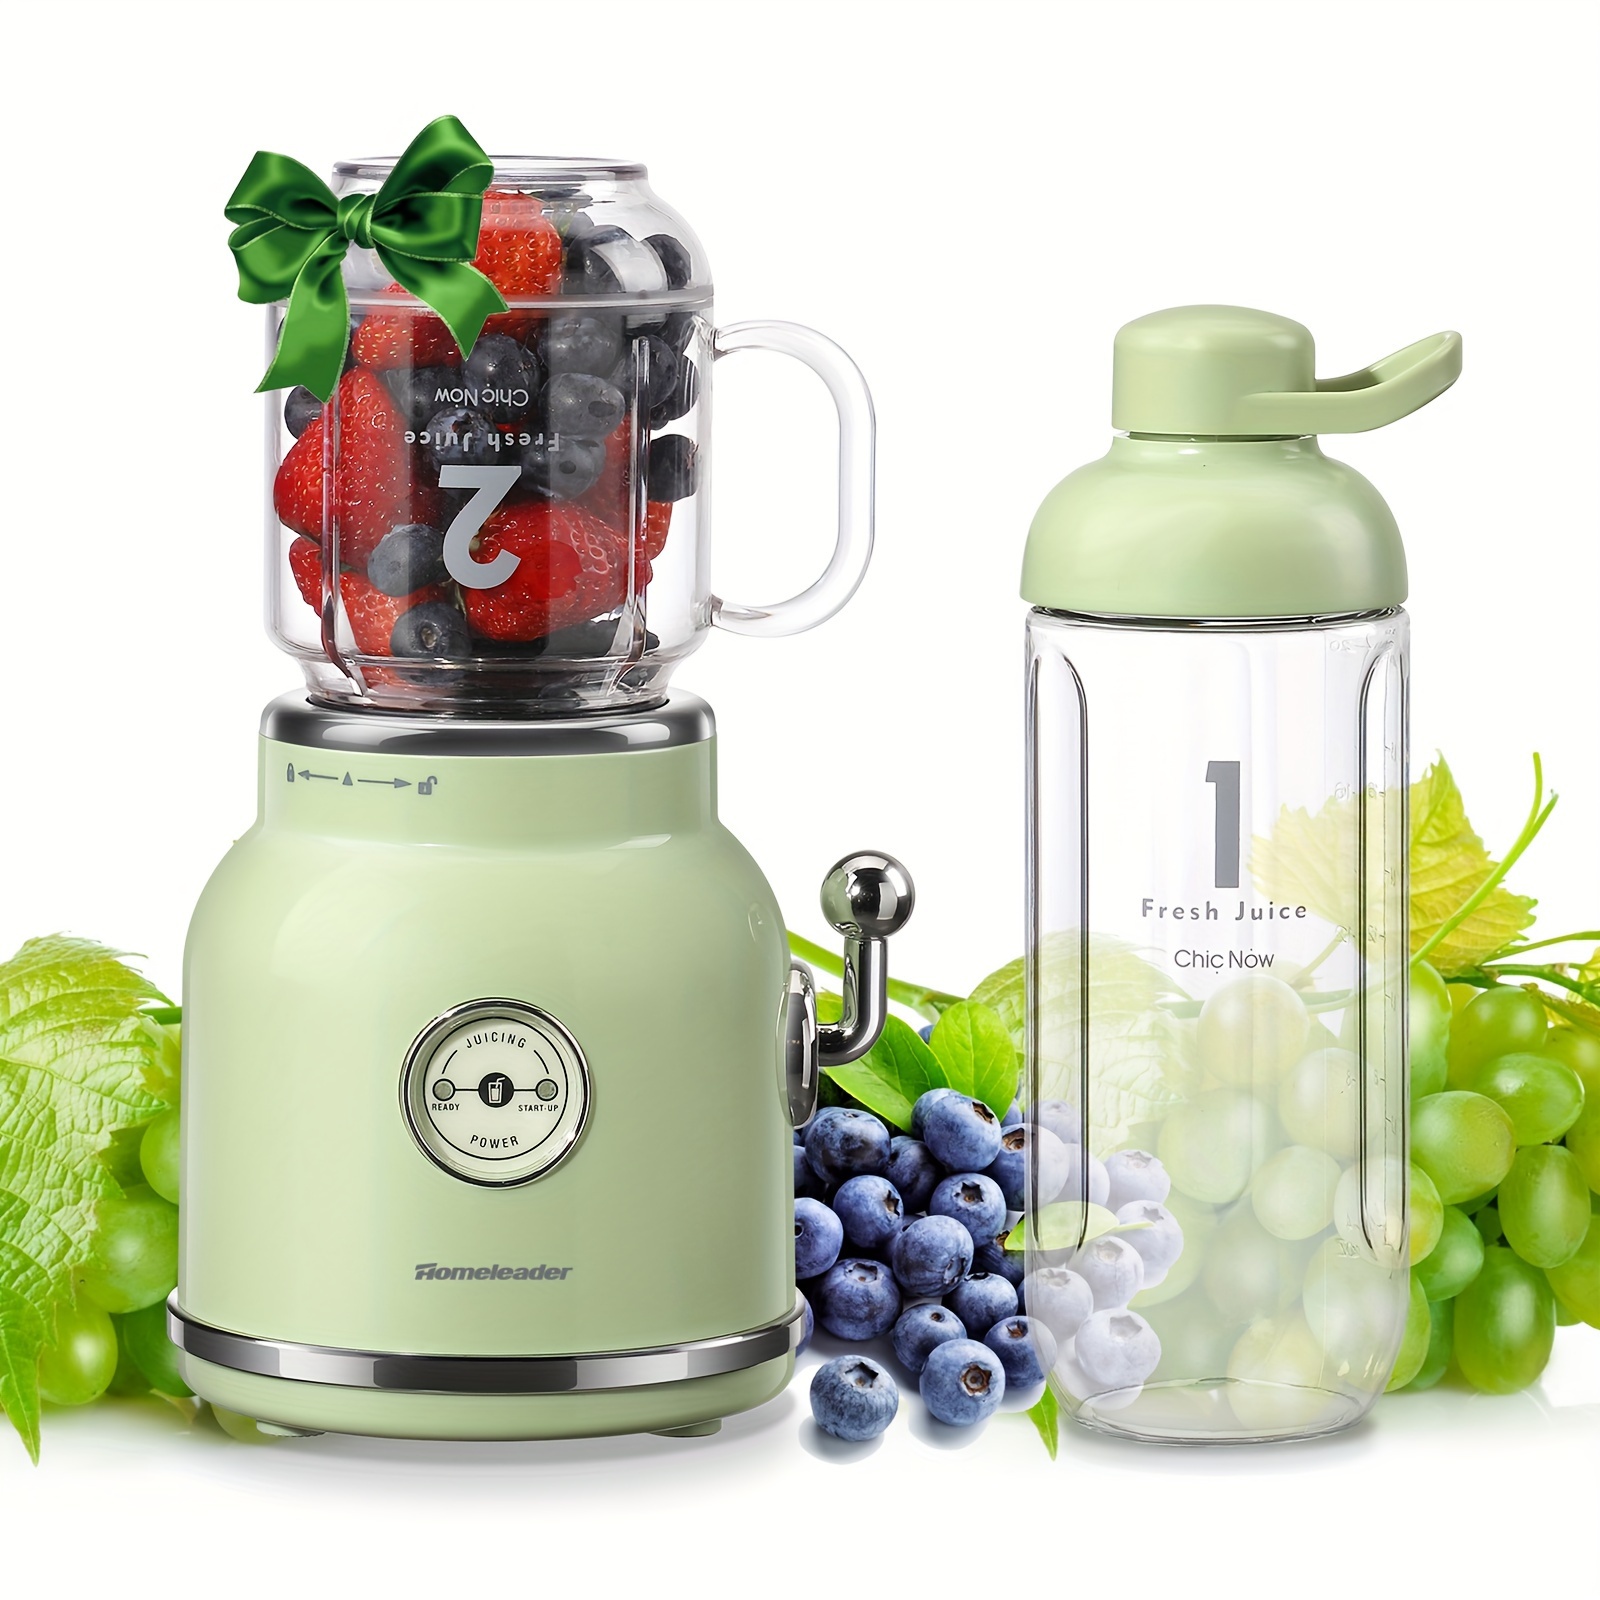 

Smoothie Blender Personal Blender, Portable Smoothie Maker For Juice Shakes And Smoothie With 6 Sharp Blades, Travel Cup And Lid, Green